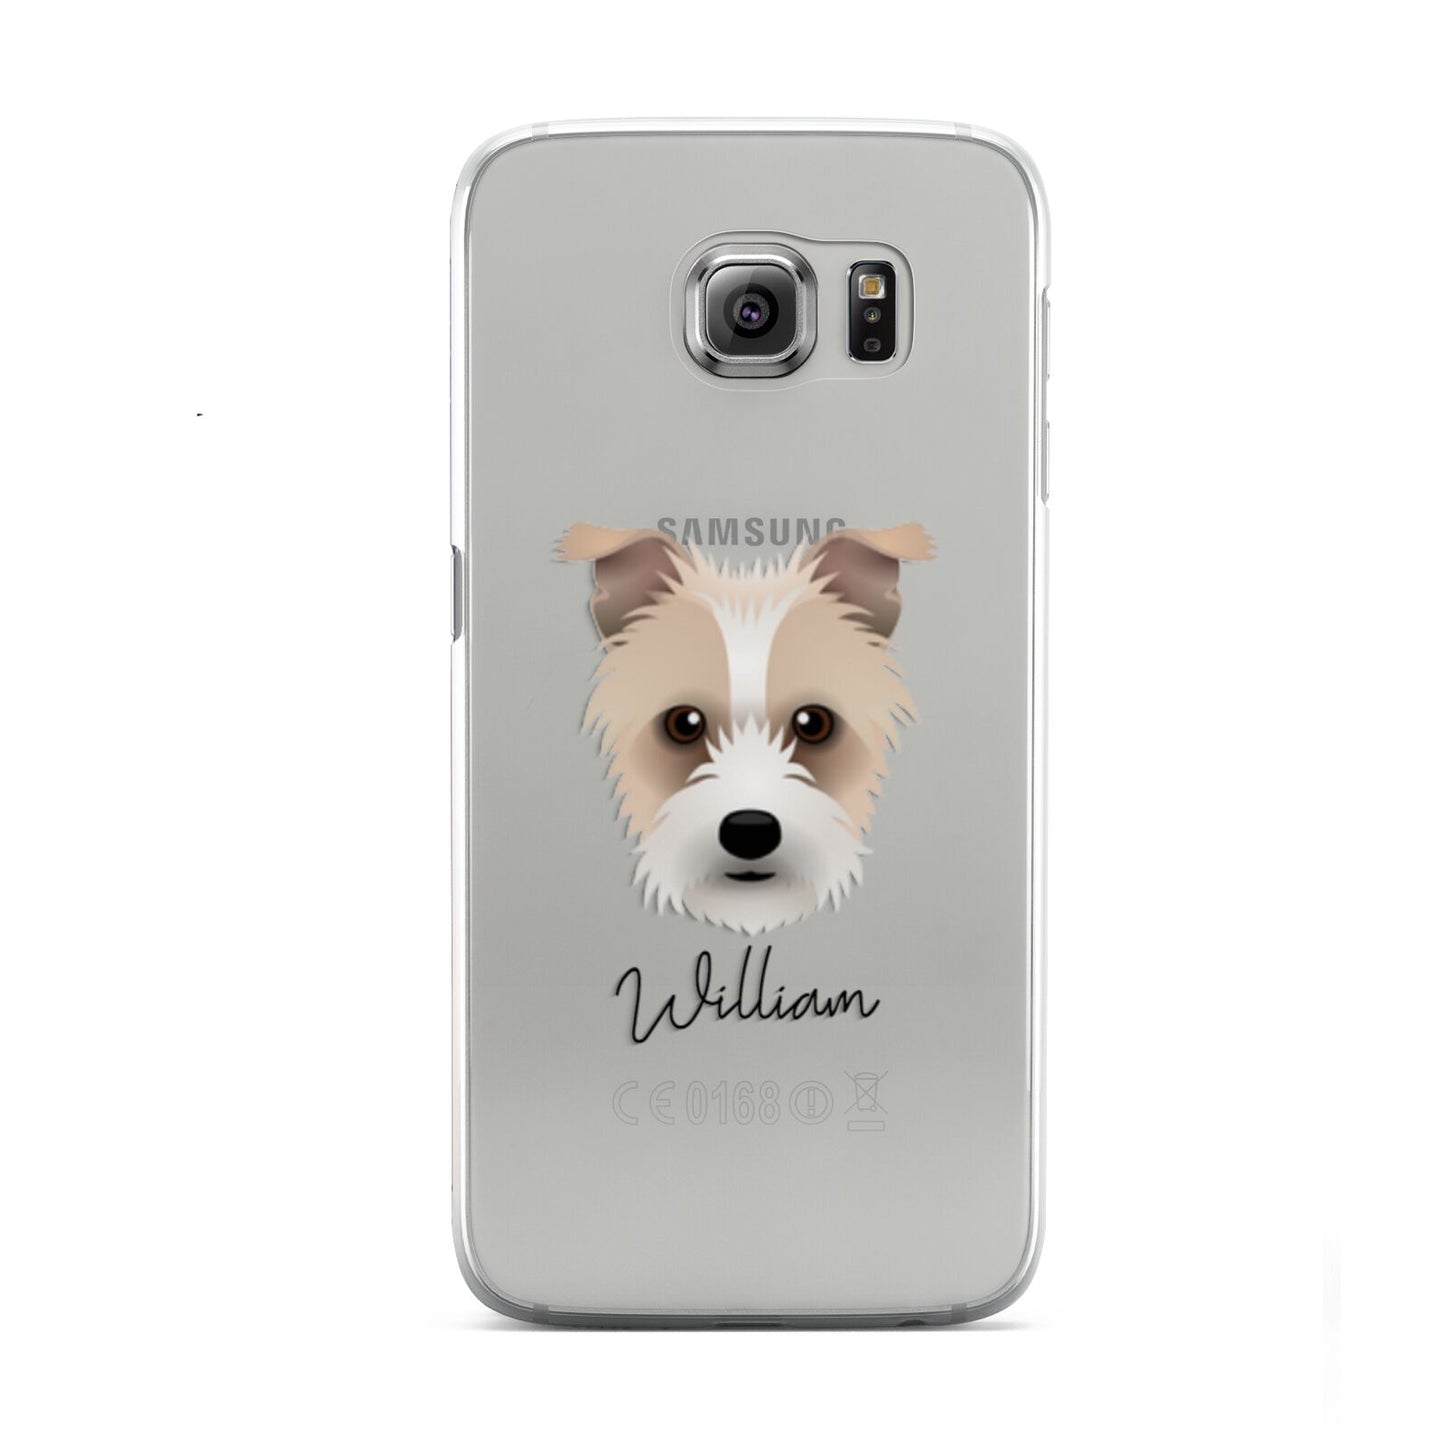 Sporting Lucas Terrier Personalised Samsung Galaxy S6 Case